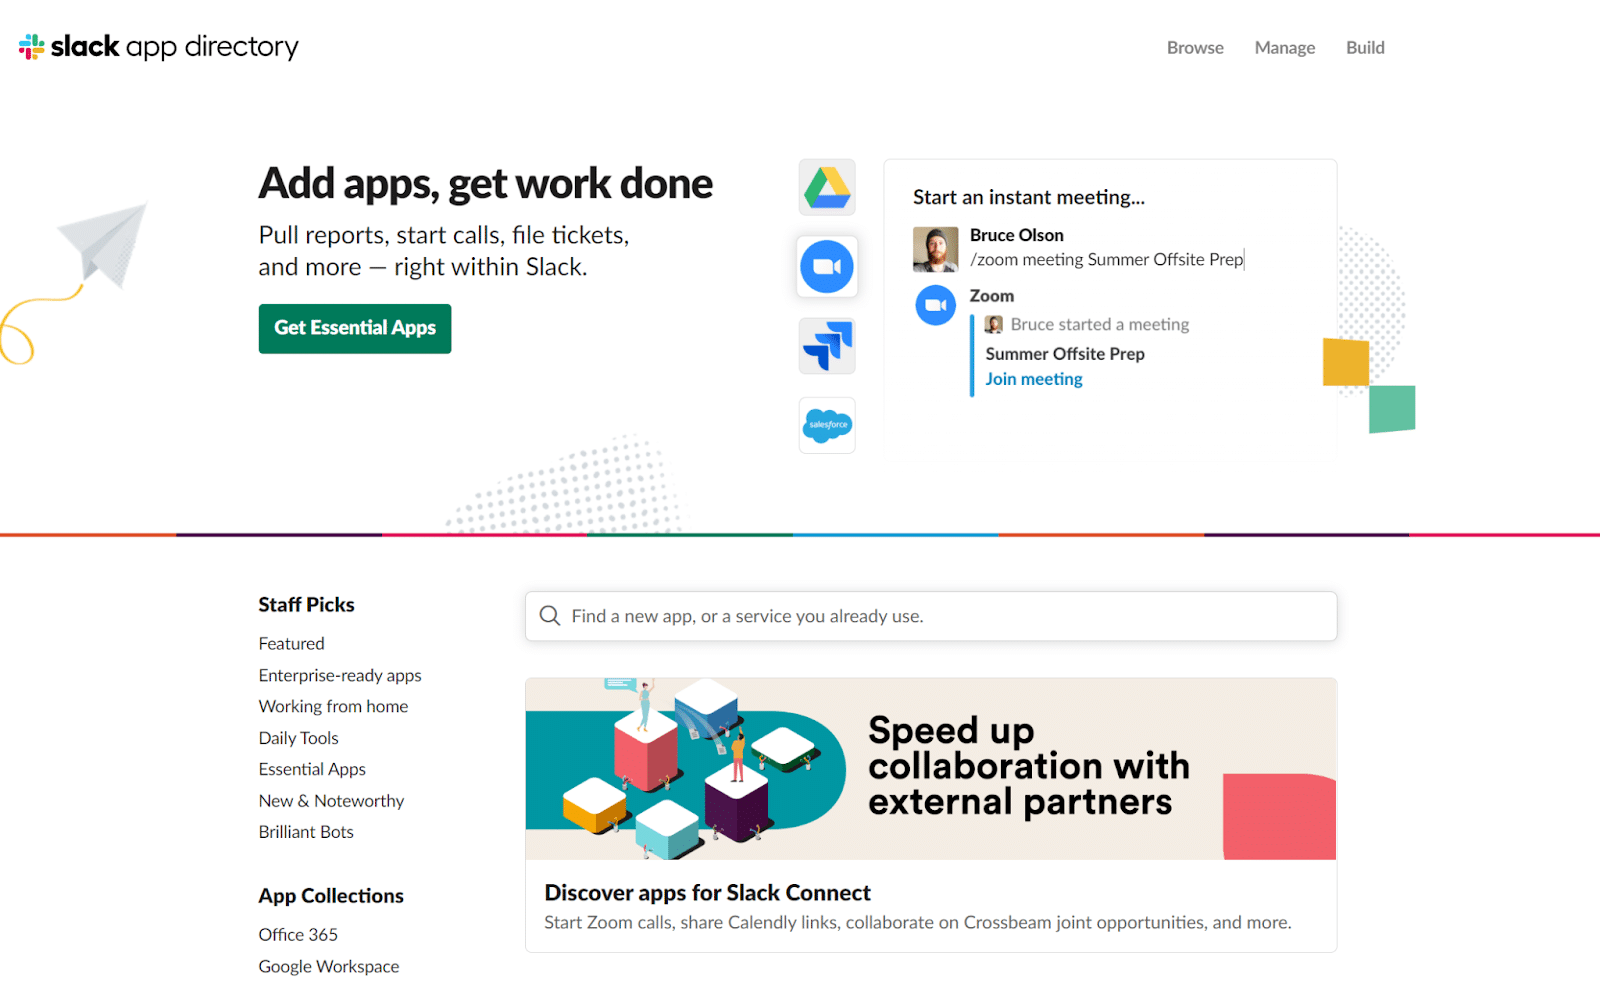 A screenshot of Slack's app directory with the headline 